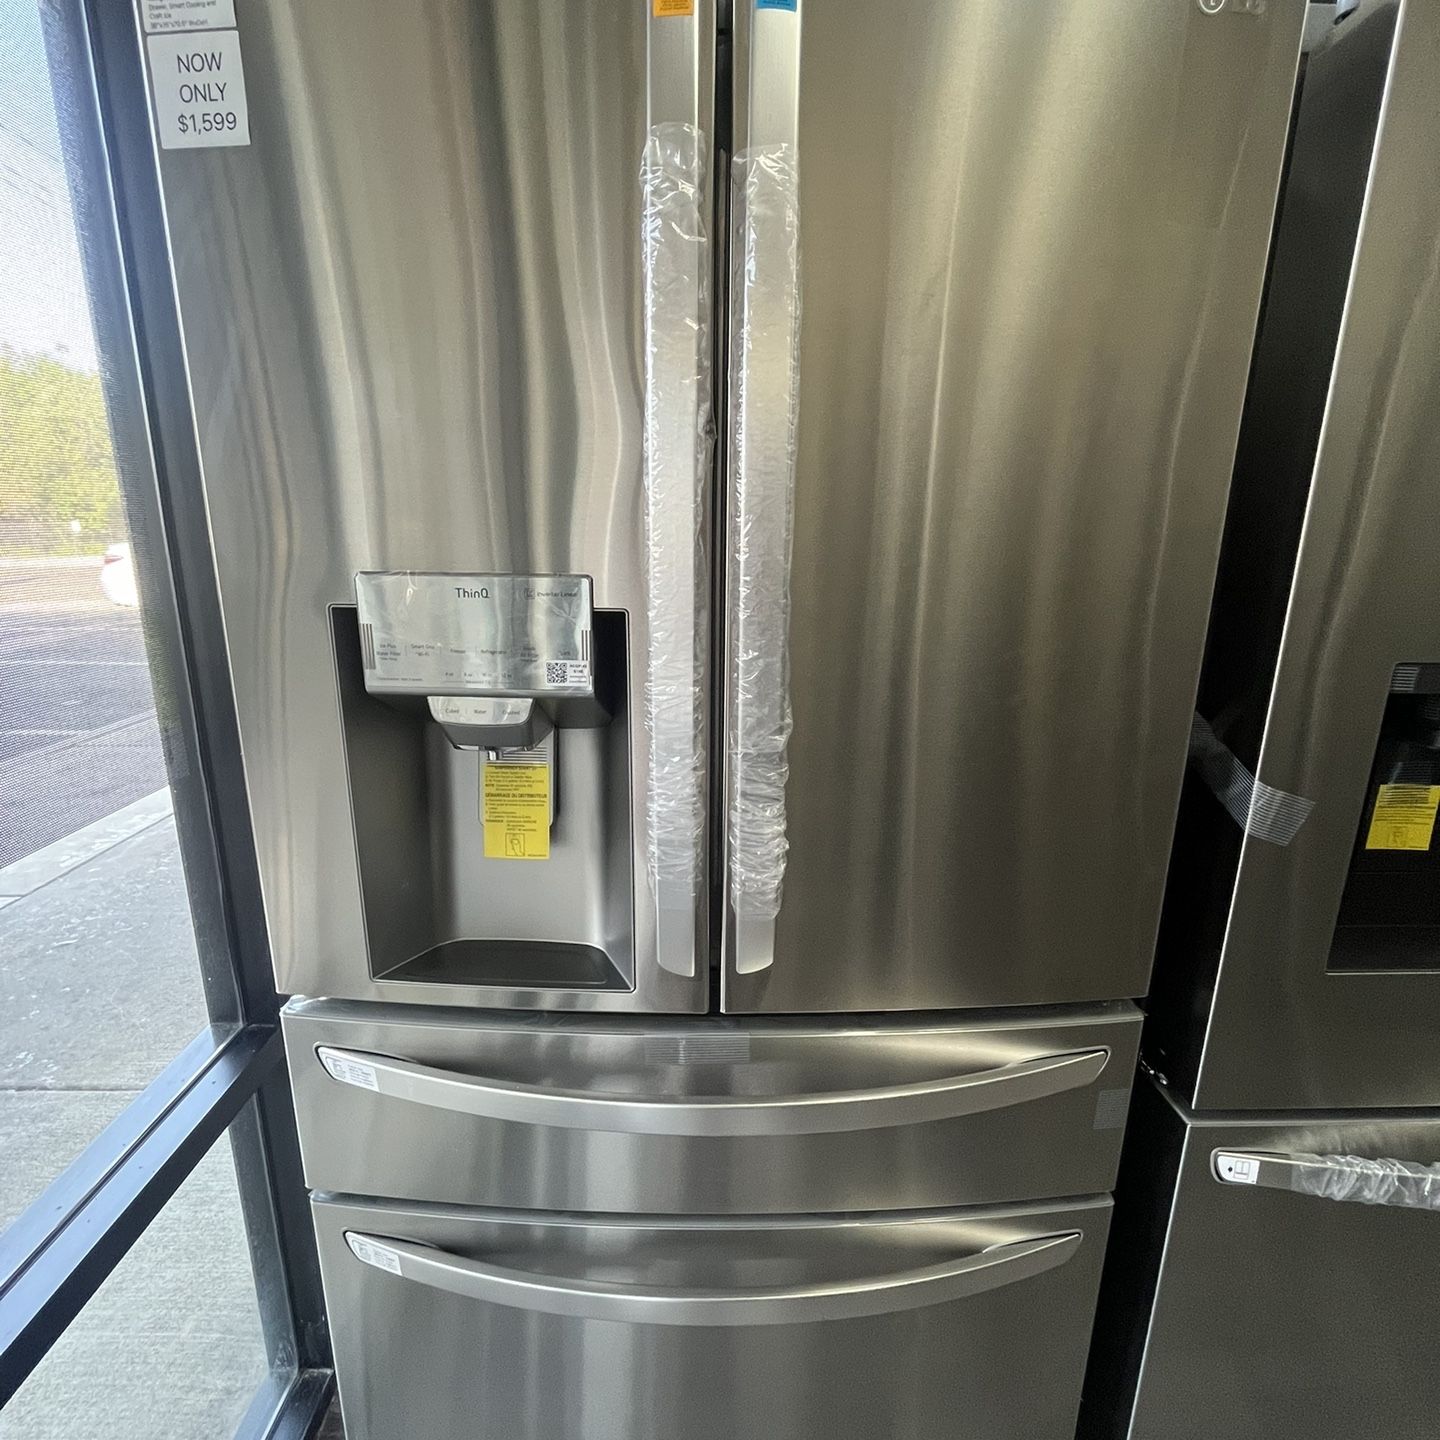 Limited Time/ Large Capacity Refrigerator With Full-convert Drawers Was$4000 Now$1599